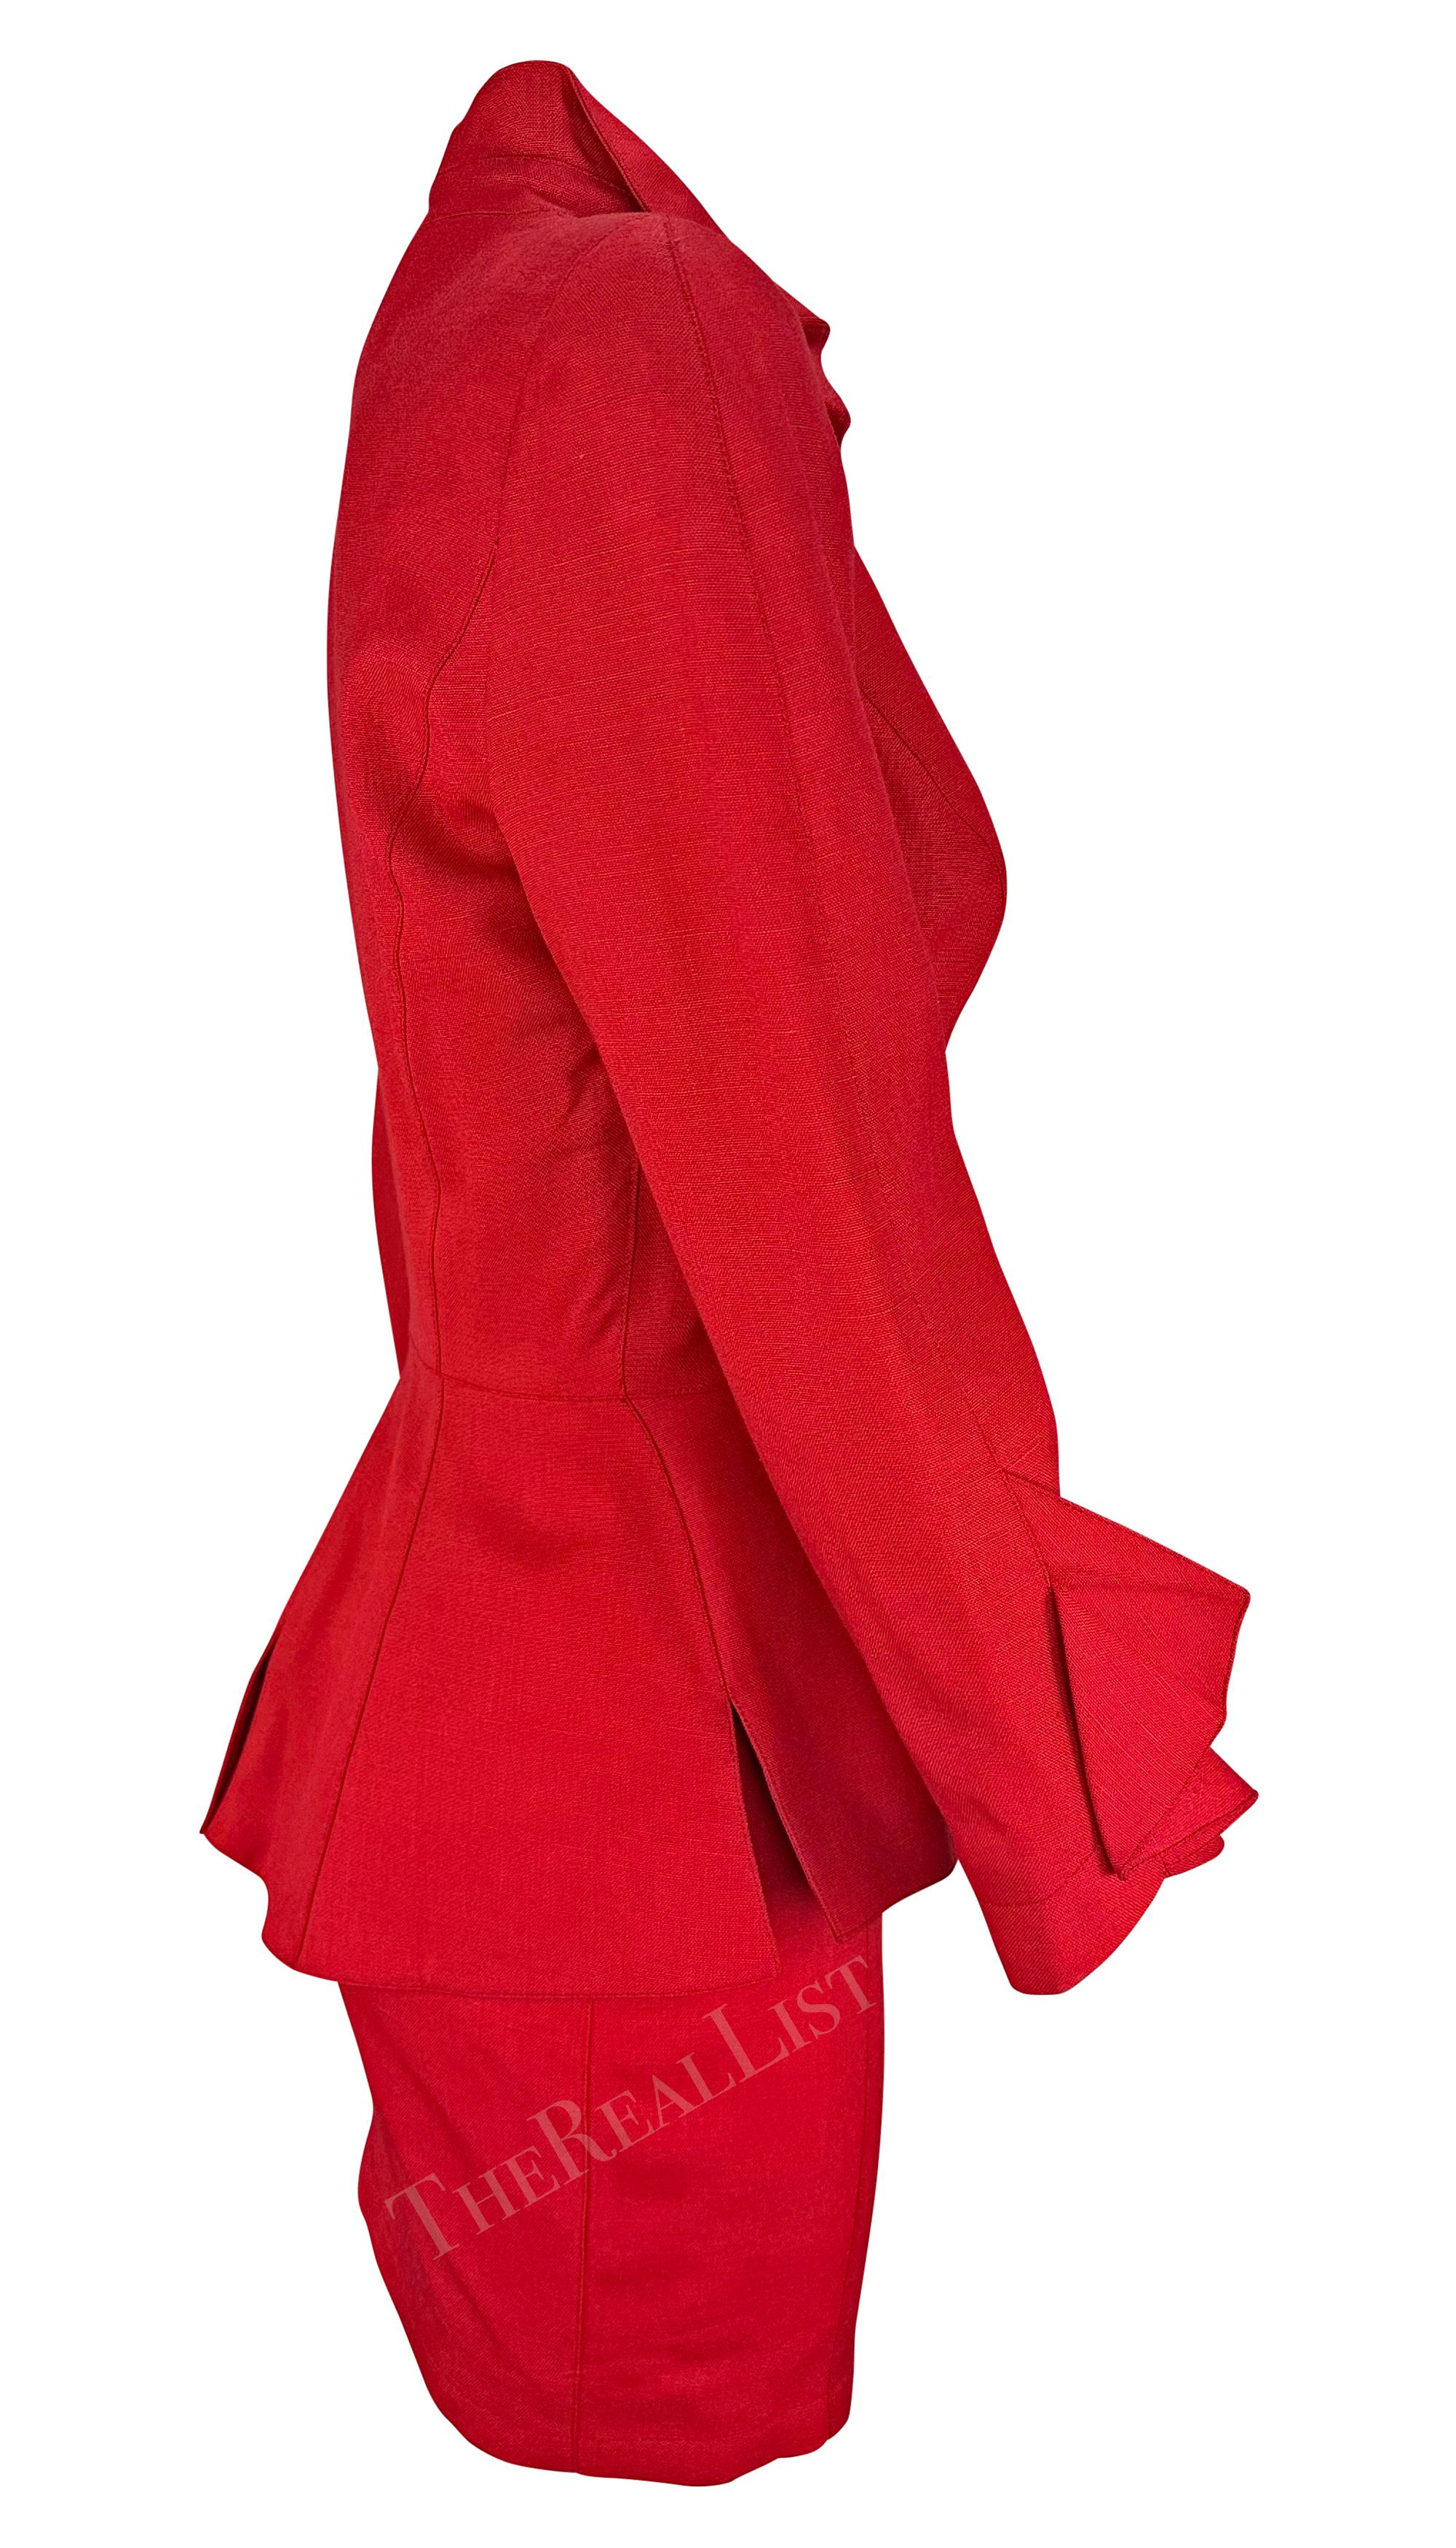 Cruise 1993 Thierry Mugler Runway Sculptural Fold Red Skirt Suit  For Sale 3